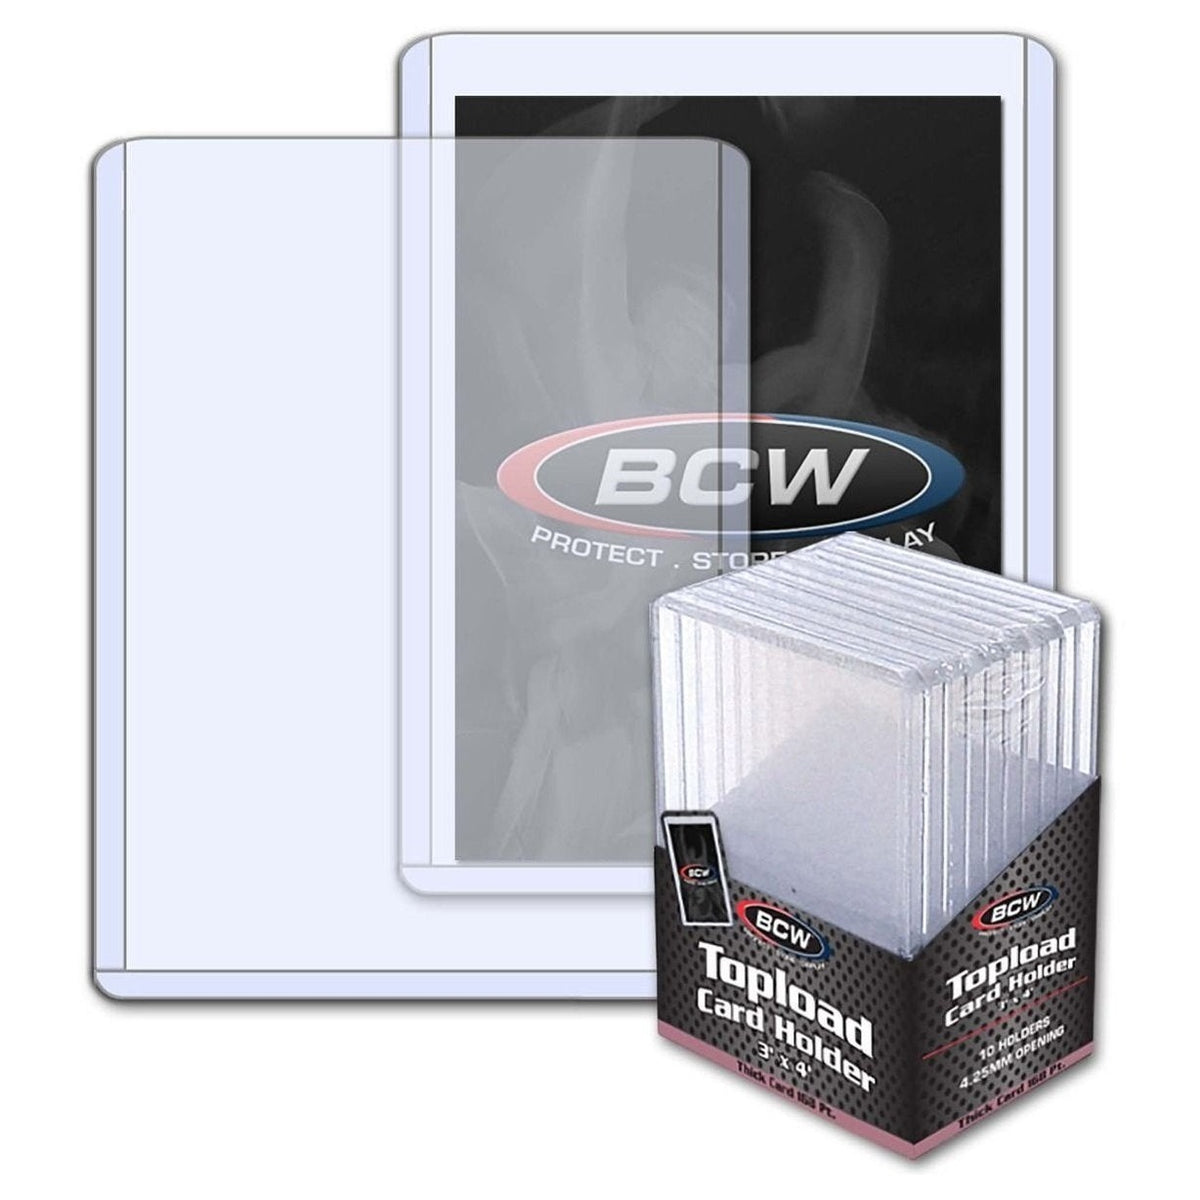 BCW Toploader Thick Card Holder -168PT 3 x 4 x 1/4 ( Clear  )